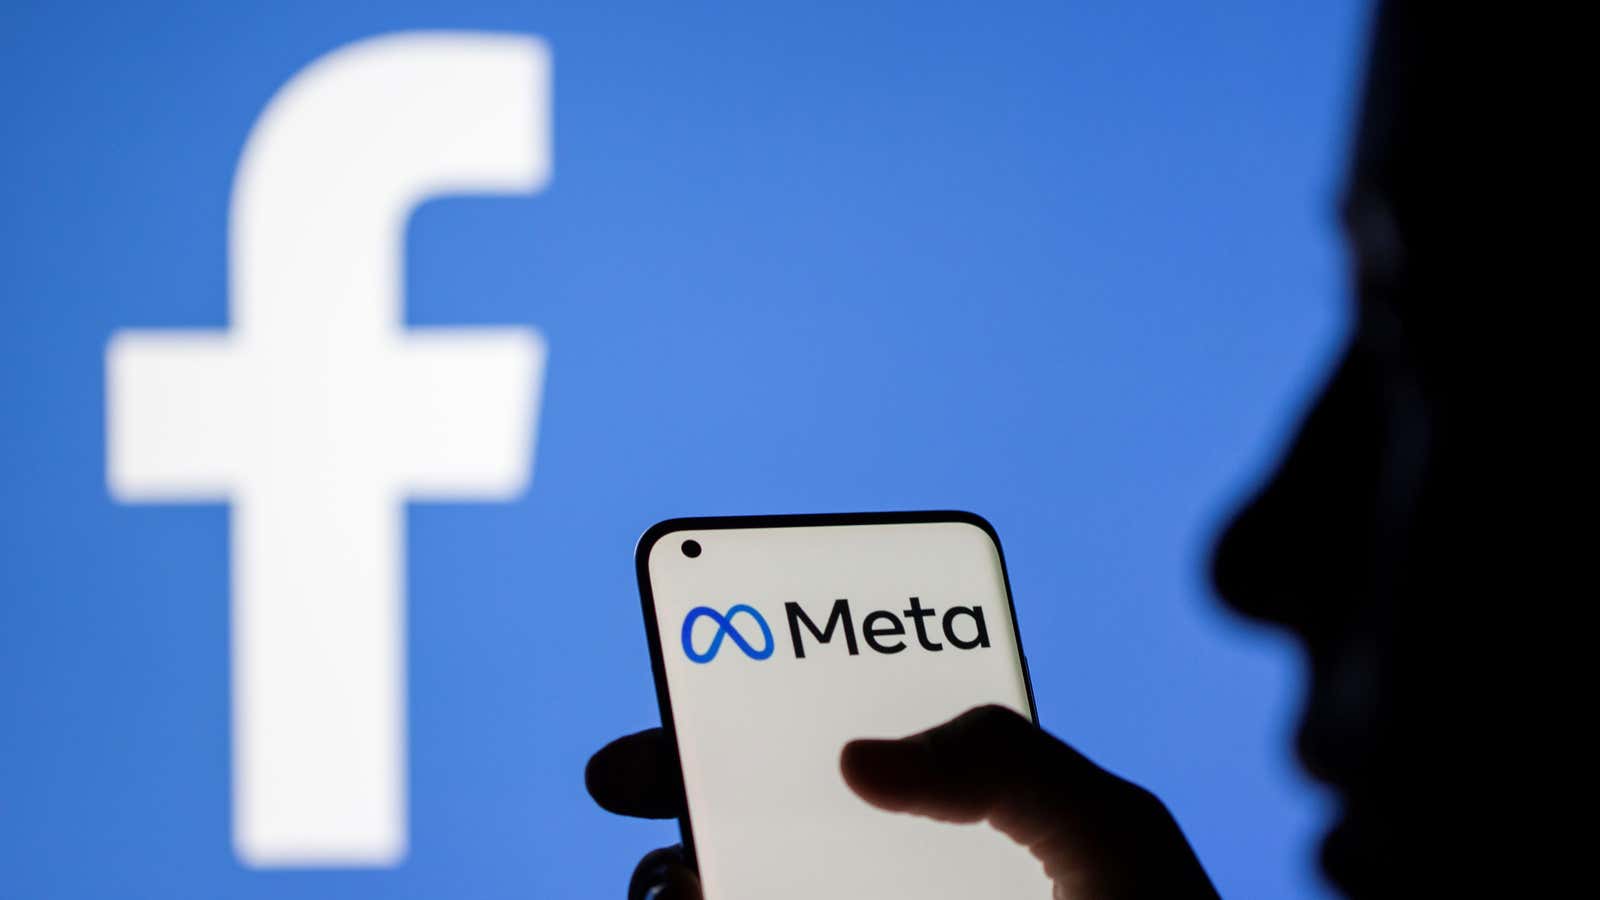 The Meta logo with Facebook’s old branding in the background